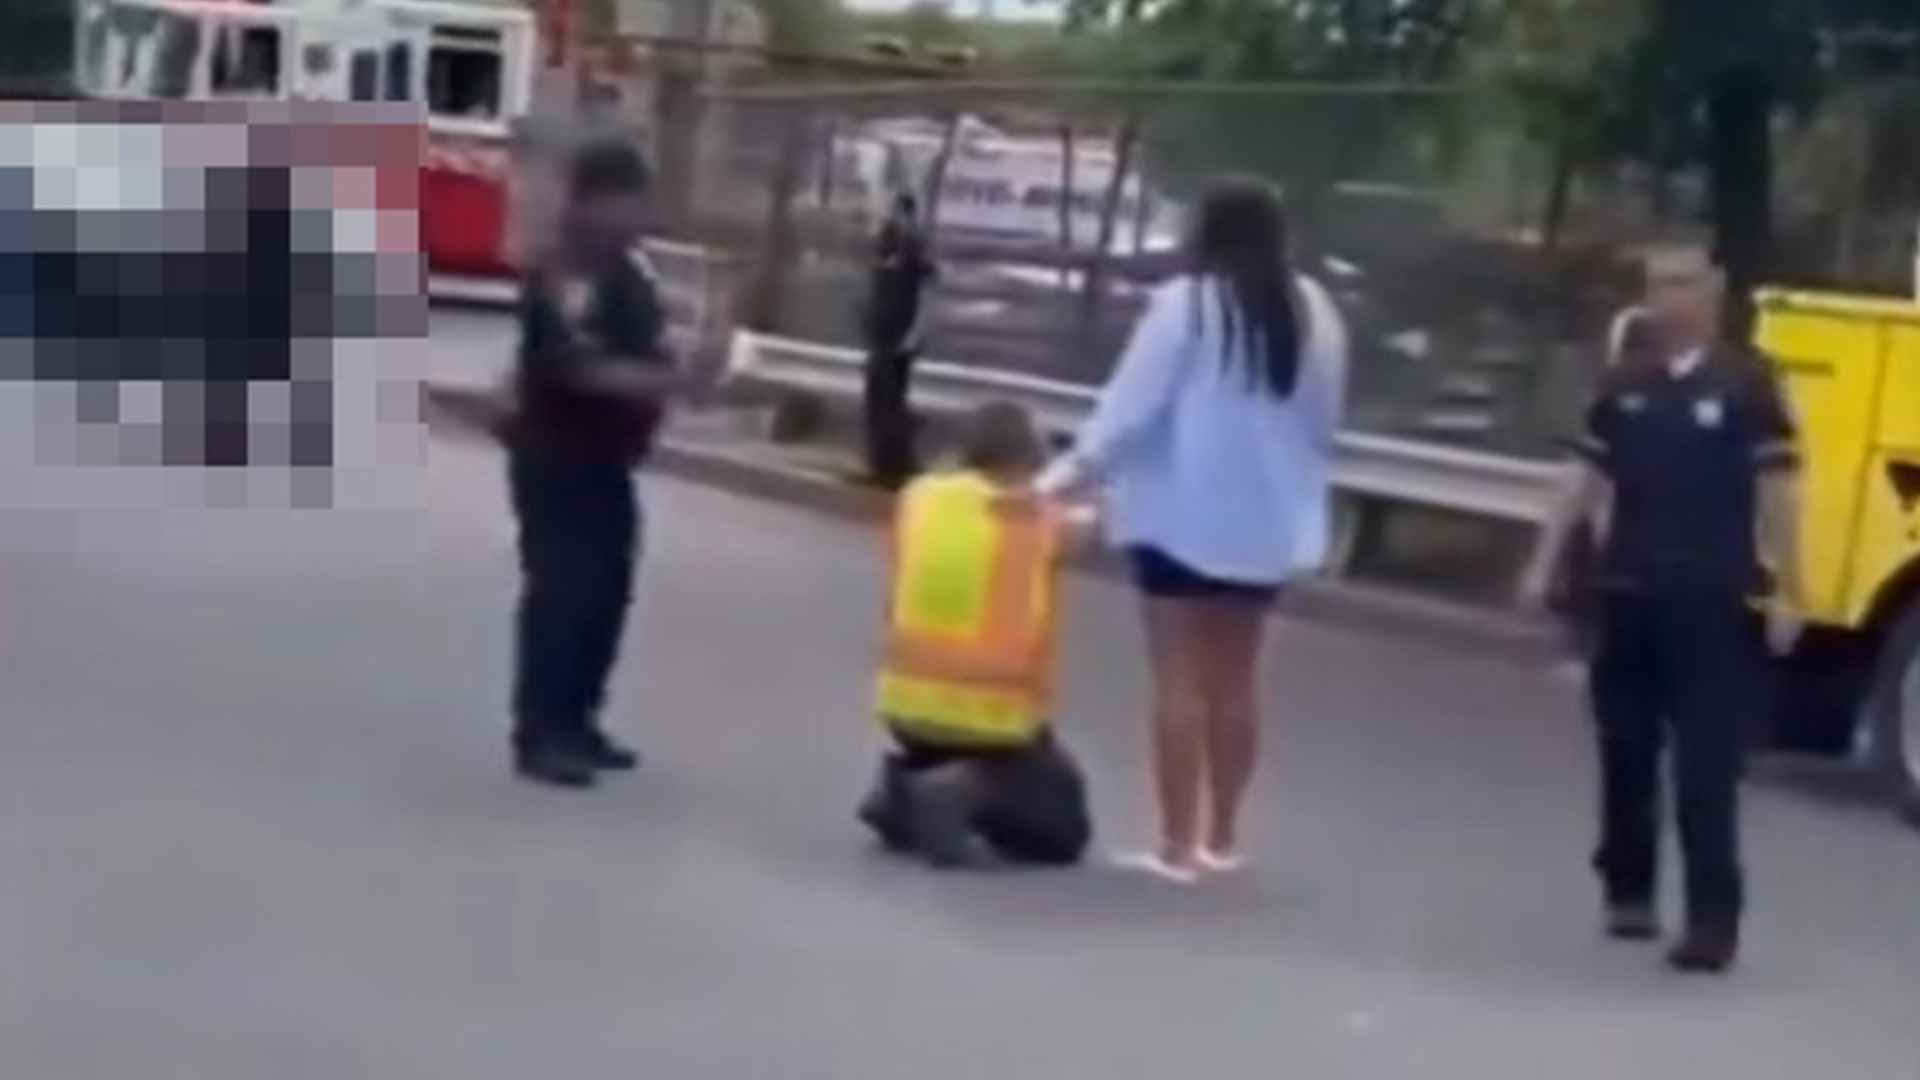 Sickening video shows moments after elderly pedestrian is decapitated by truck as traumatized driver falls to his knees